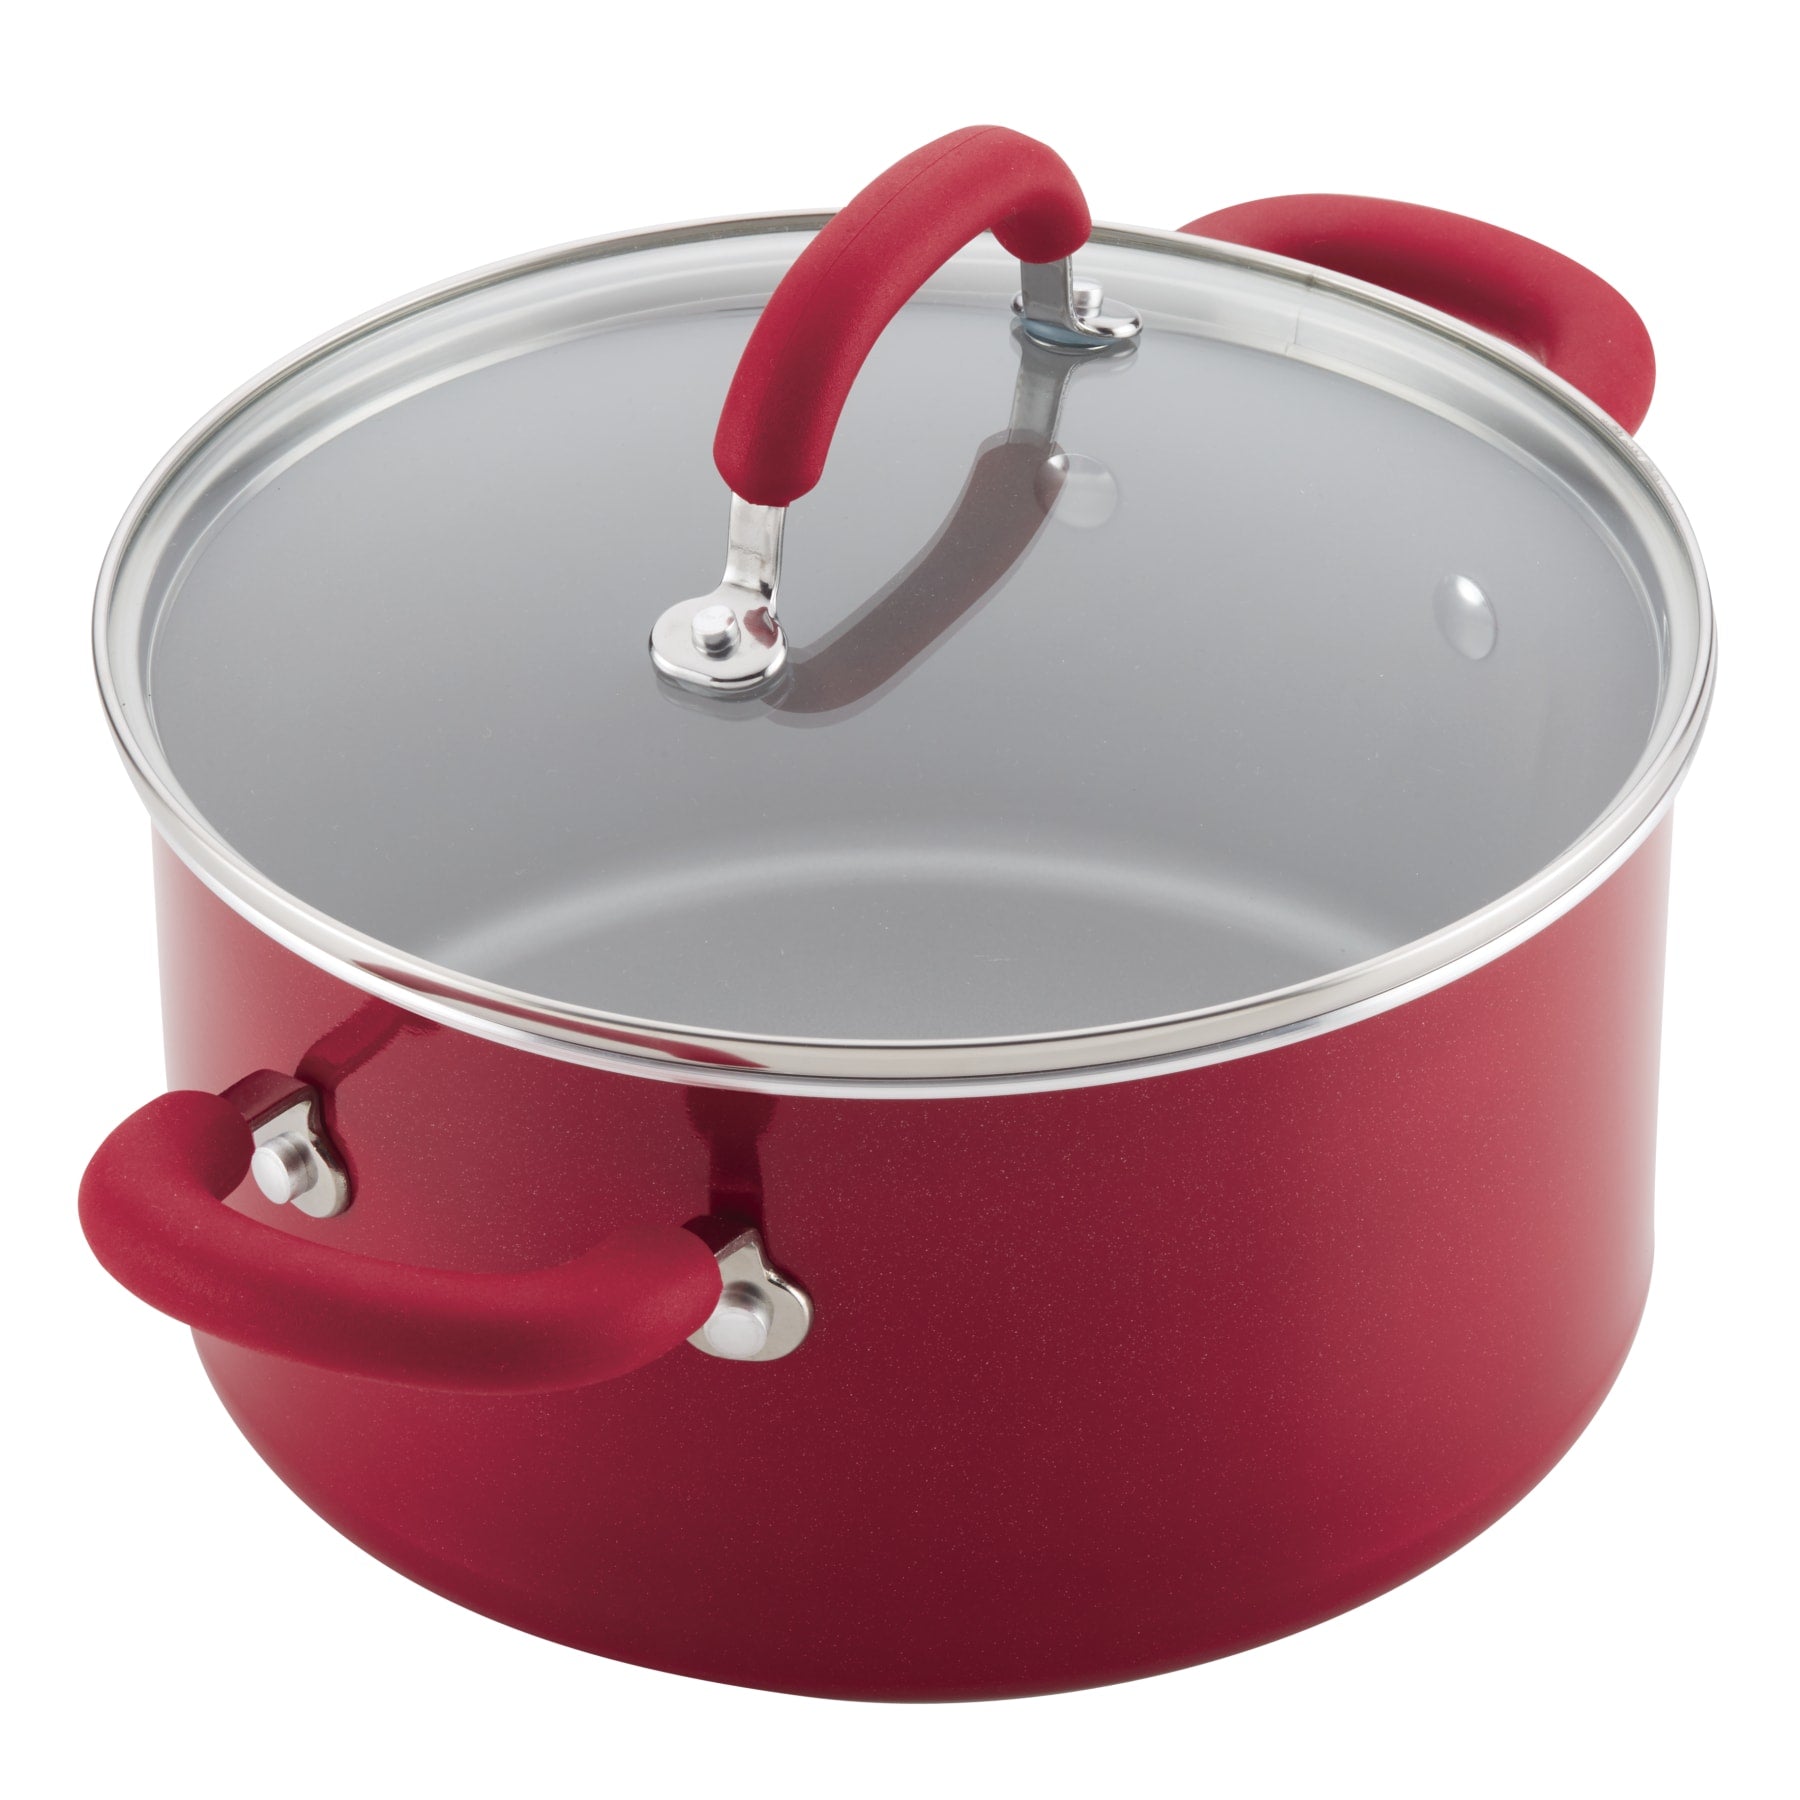 Rachael Ray 6 qt Create Delicious Aluminum Nonstick Stockpot, Red Shimmer